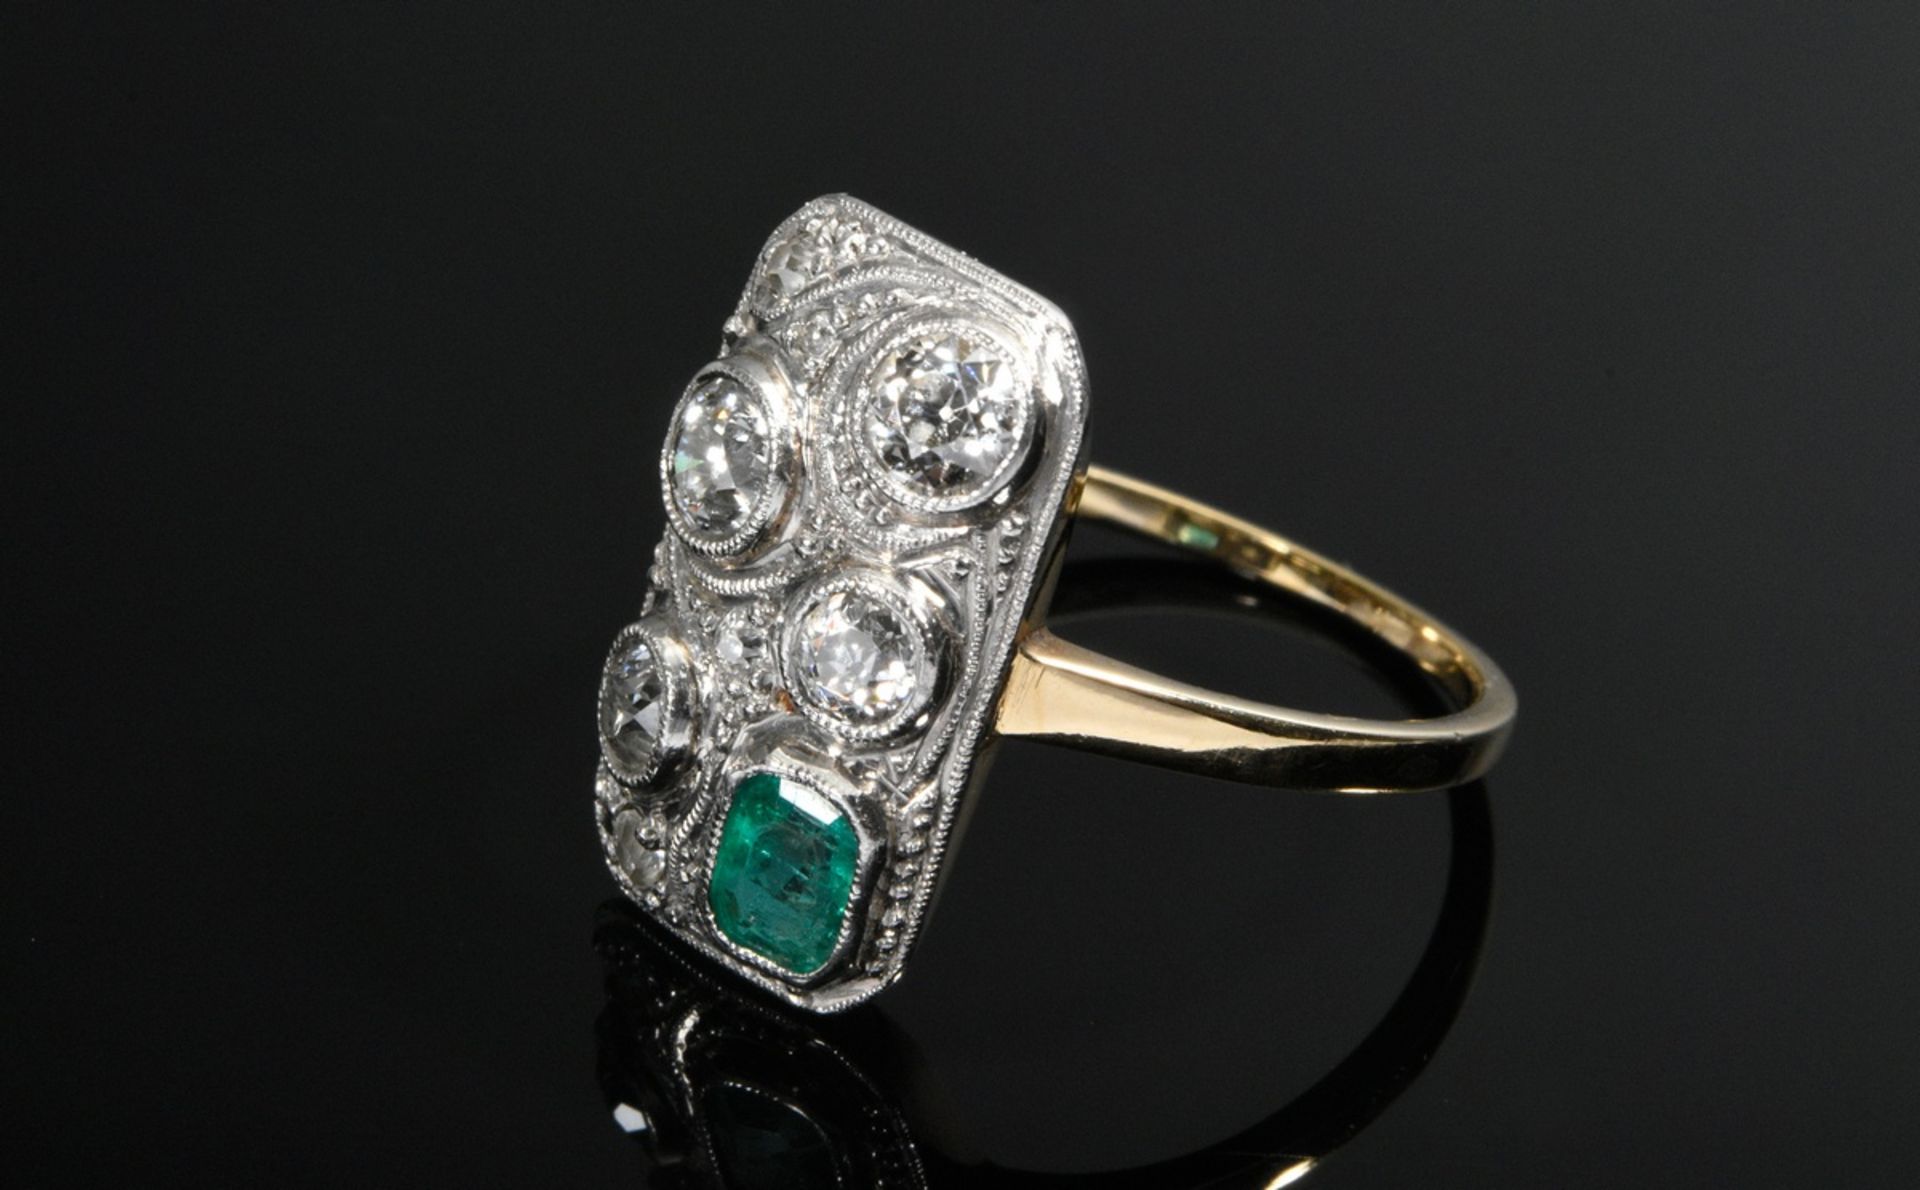 Handcrafted platinum-plated Art Deco yellow gold 585 ring with emerald (approx. 0.25ct) and old-cut